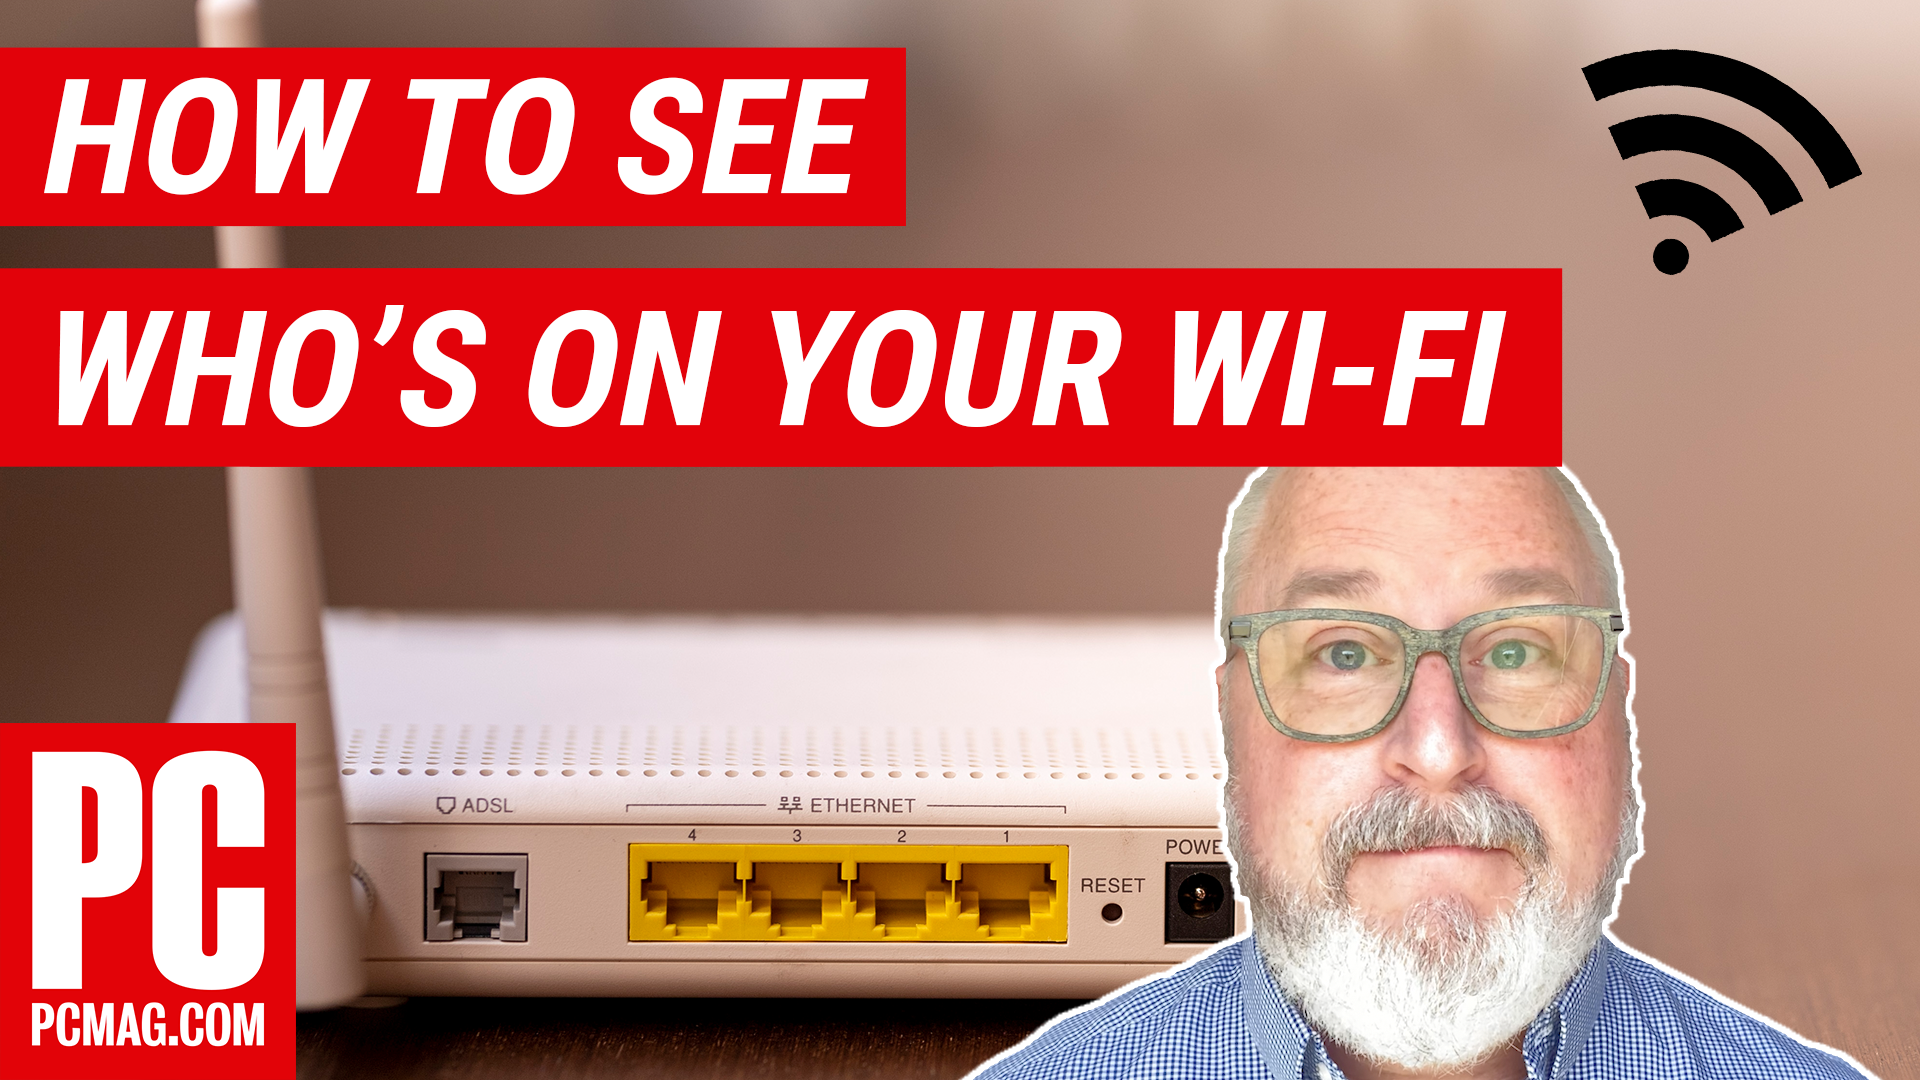 How to See Who's On Your Wi-Fi